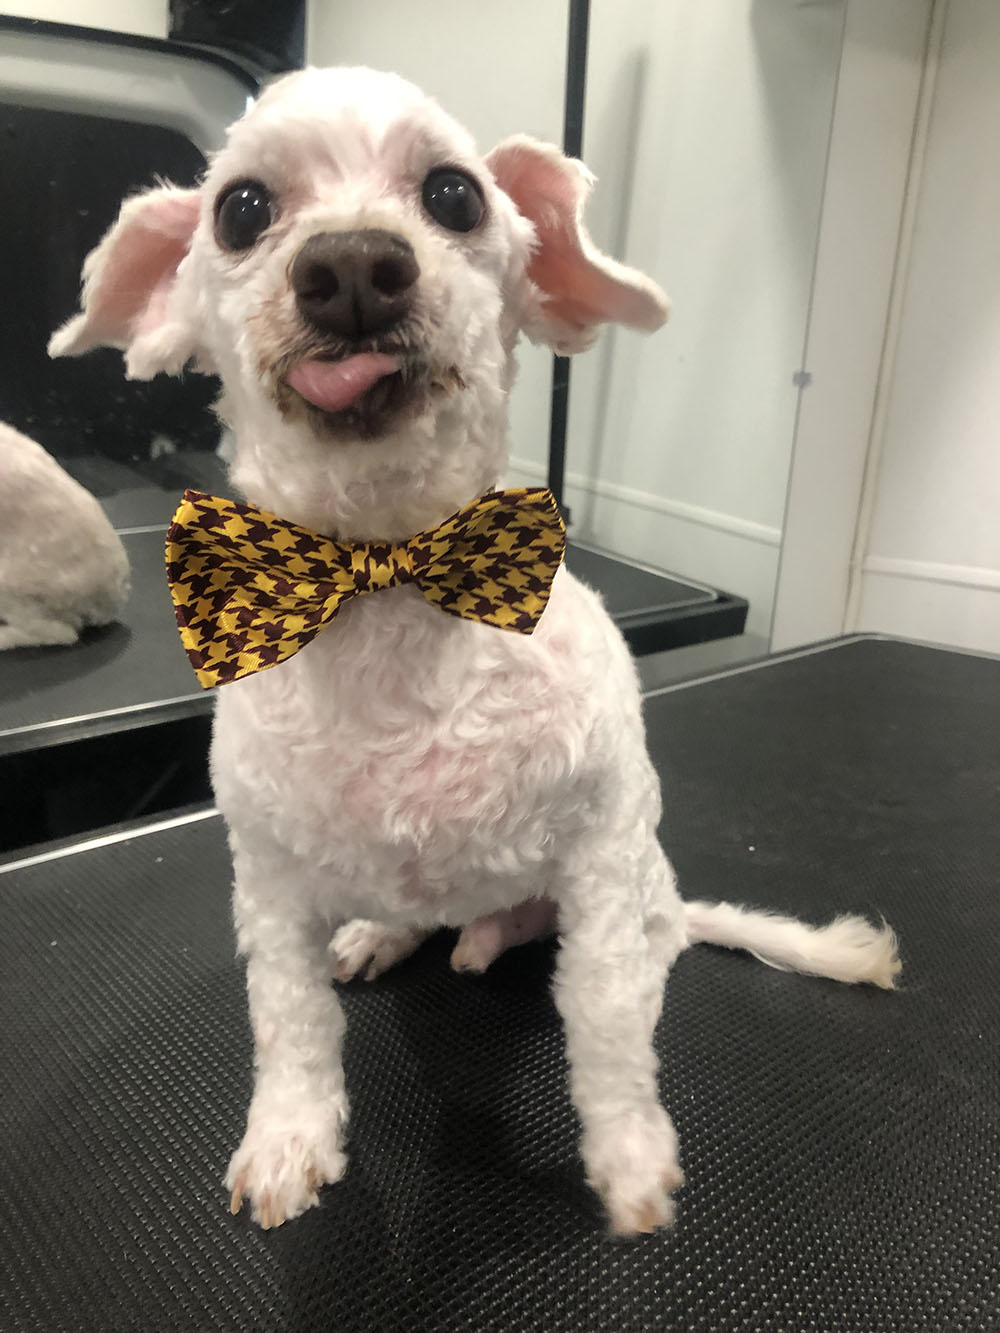 A White Color Fur Dog With Yellow Polka Dot Tie